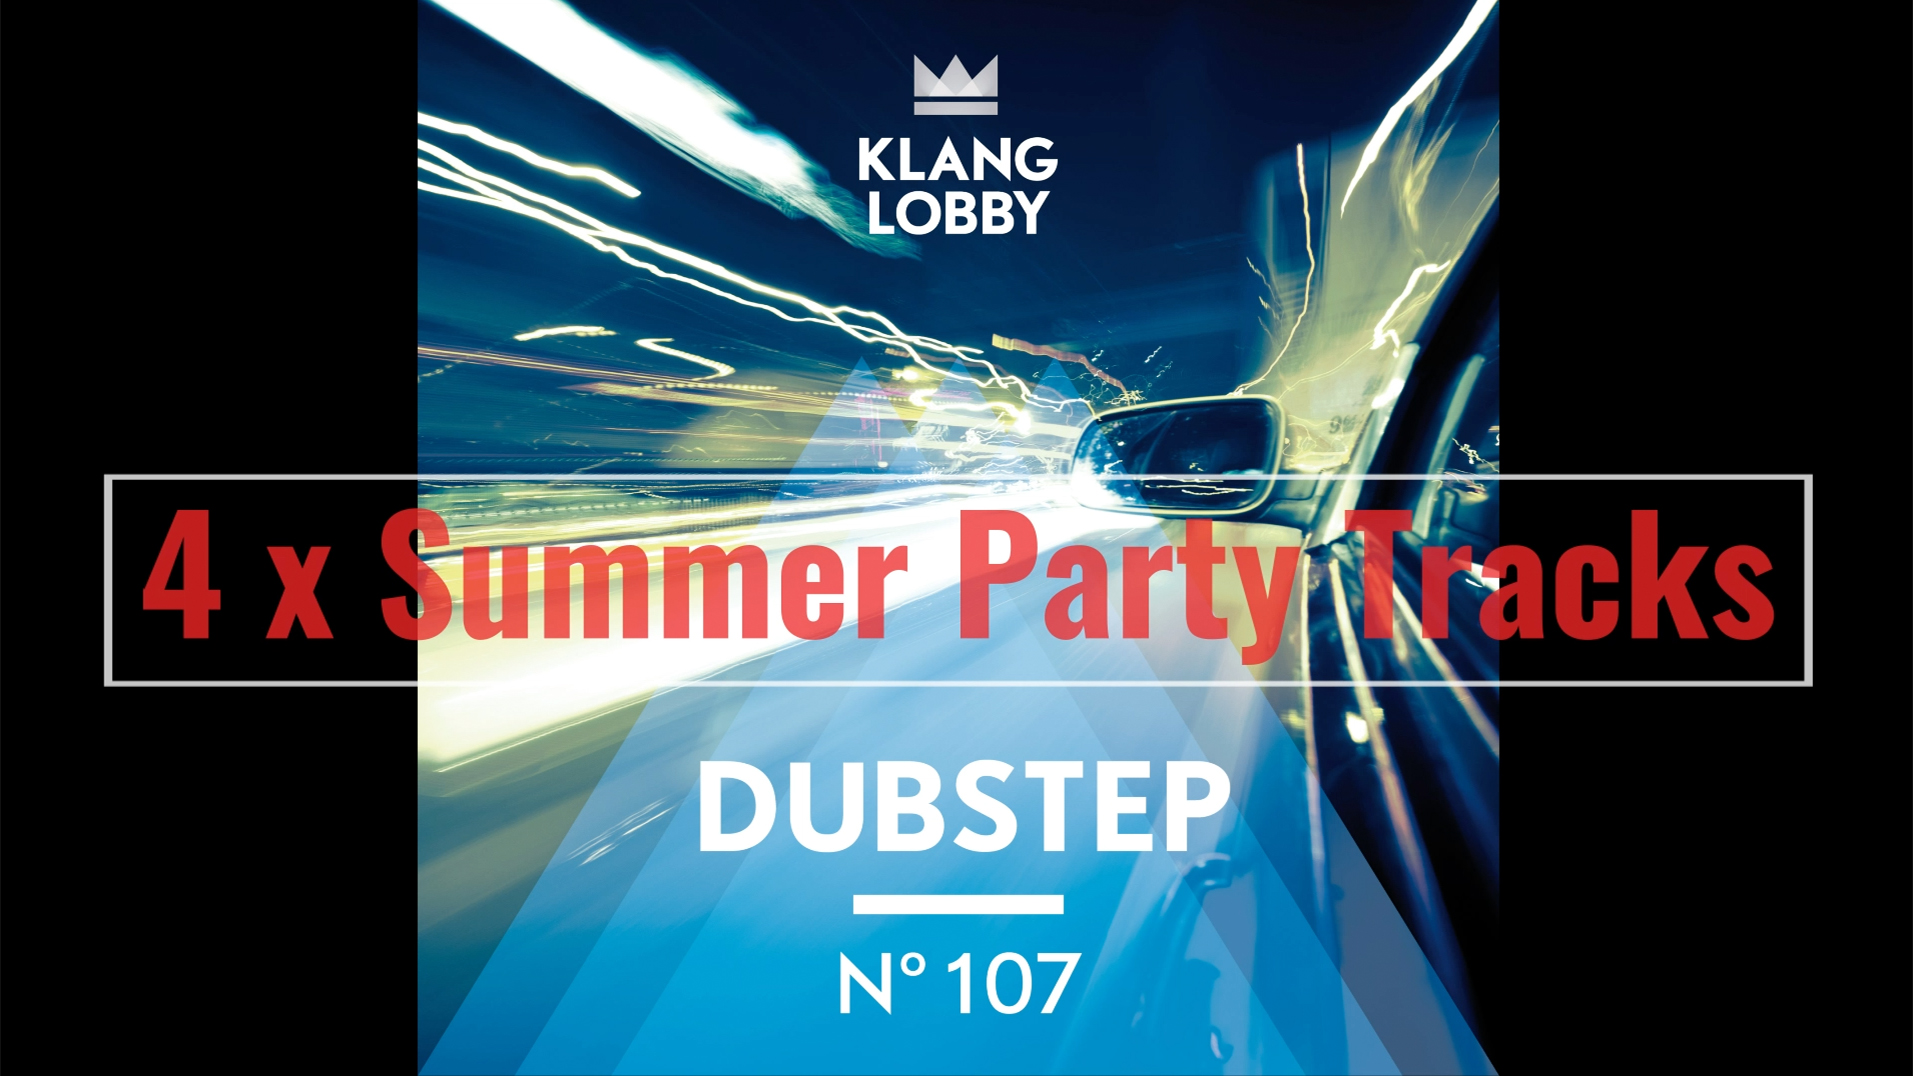 Promo Summer Party Tracks